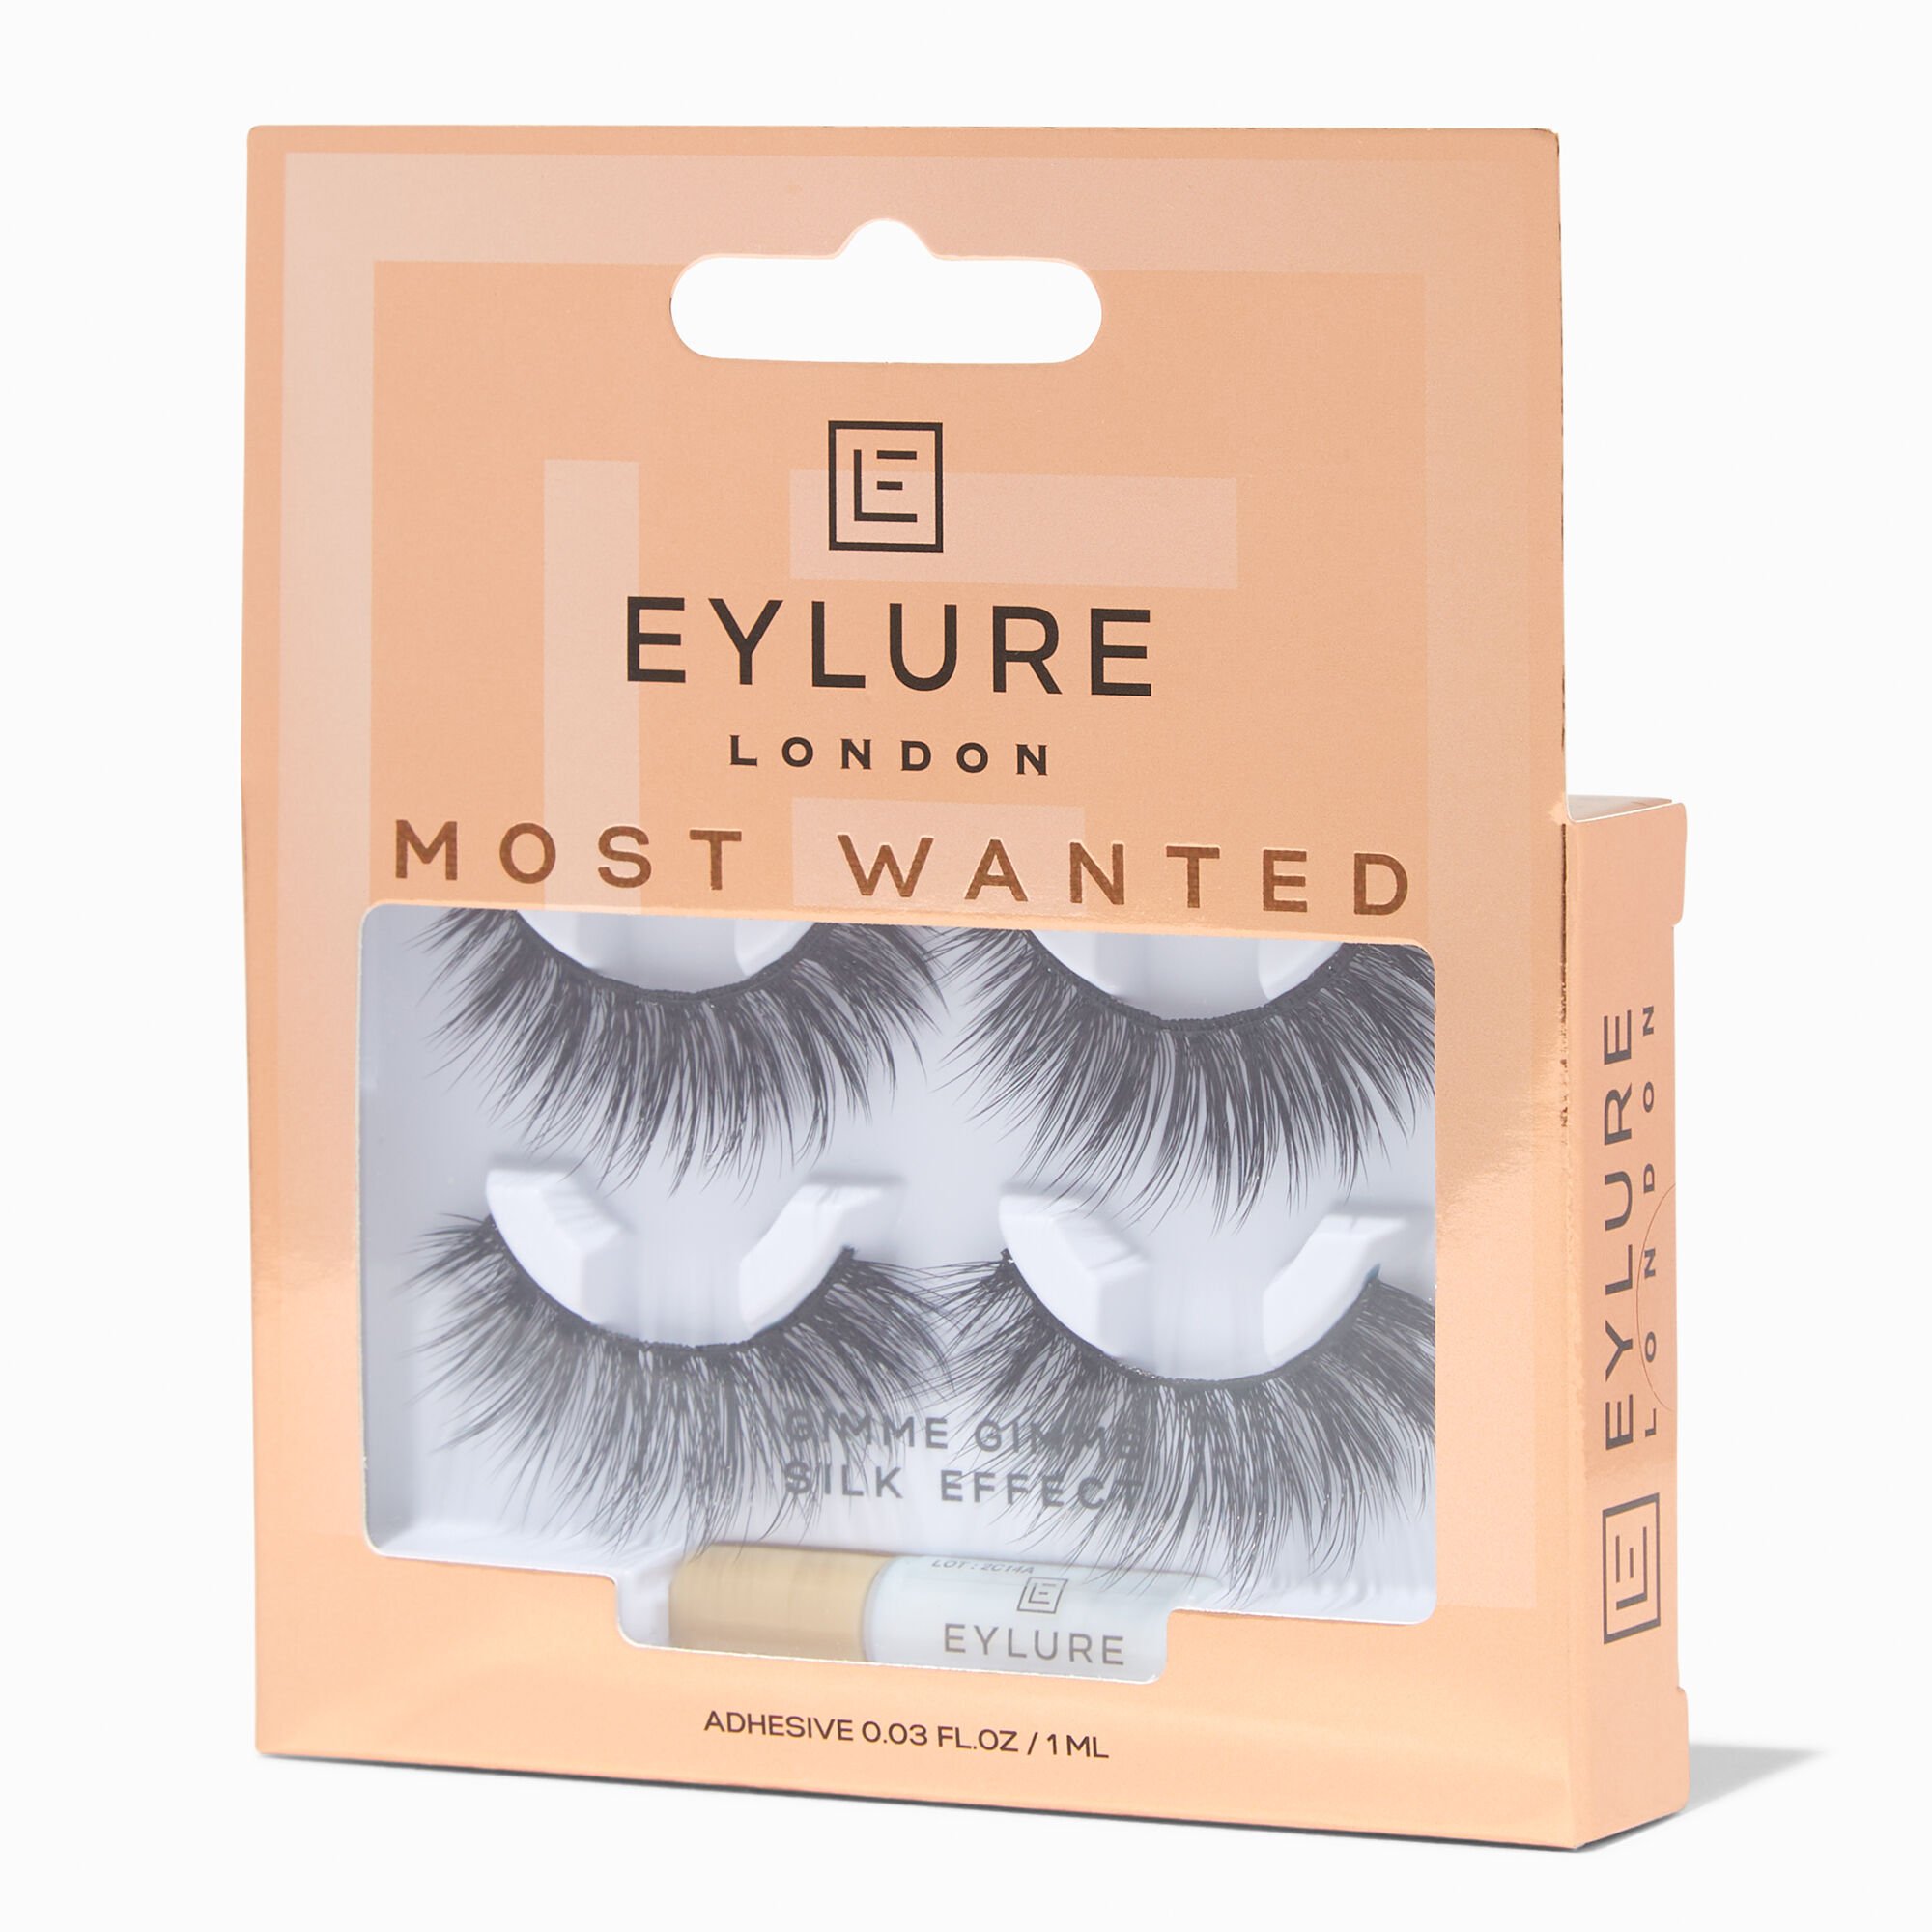 View Claires Eylure Most Wanted Faux Mink Eyelashes 2 Pack Black information